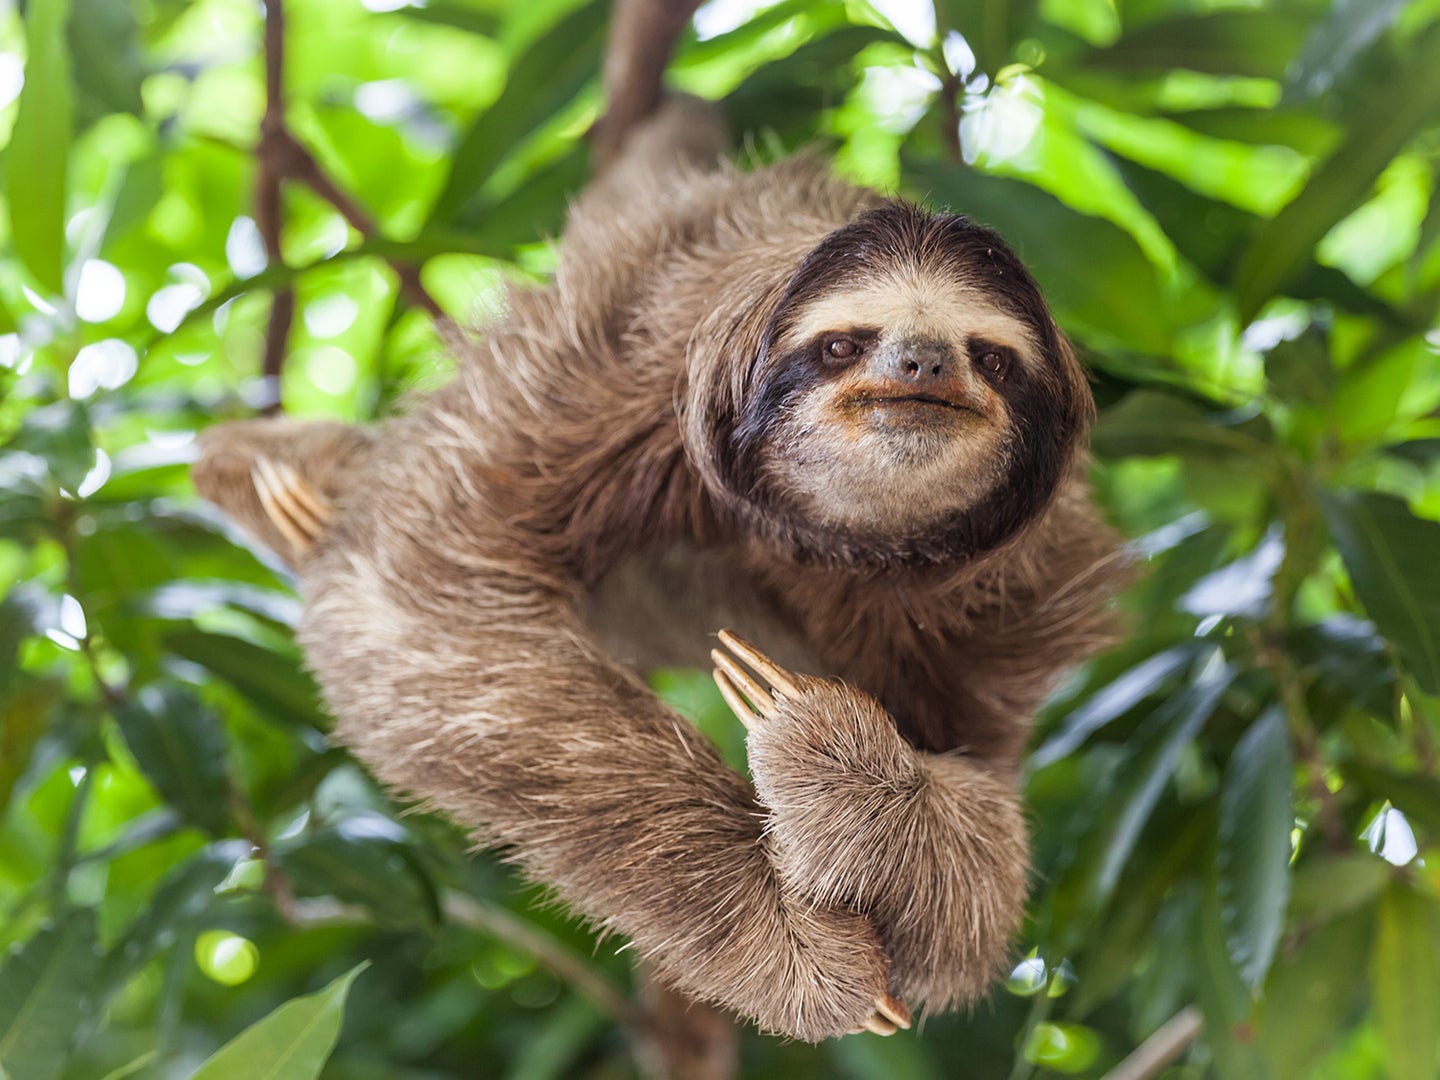 Sloths aren't the picky eaters we thought they were | Popular Science